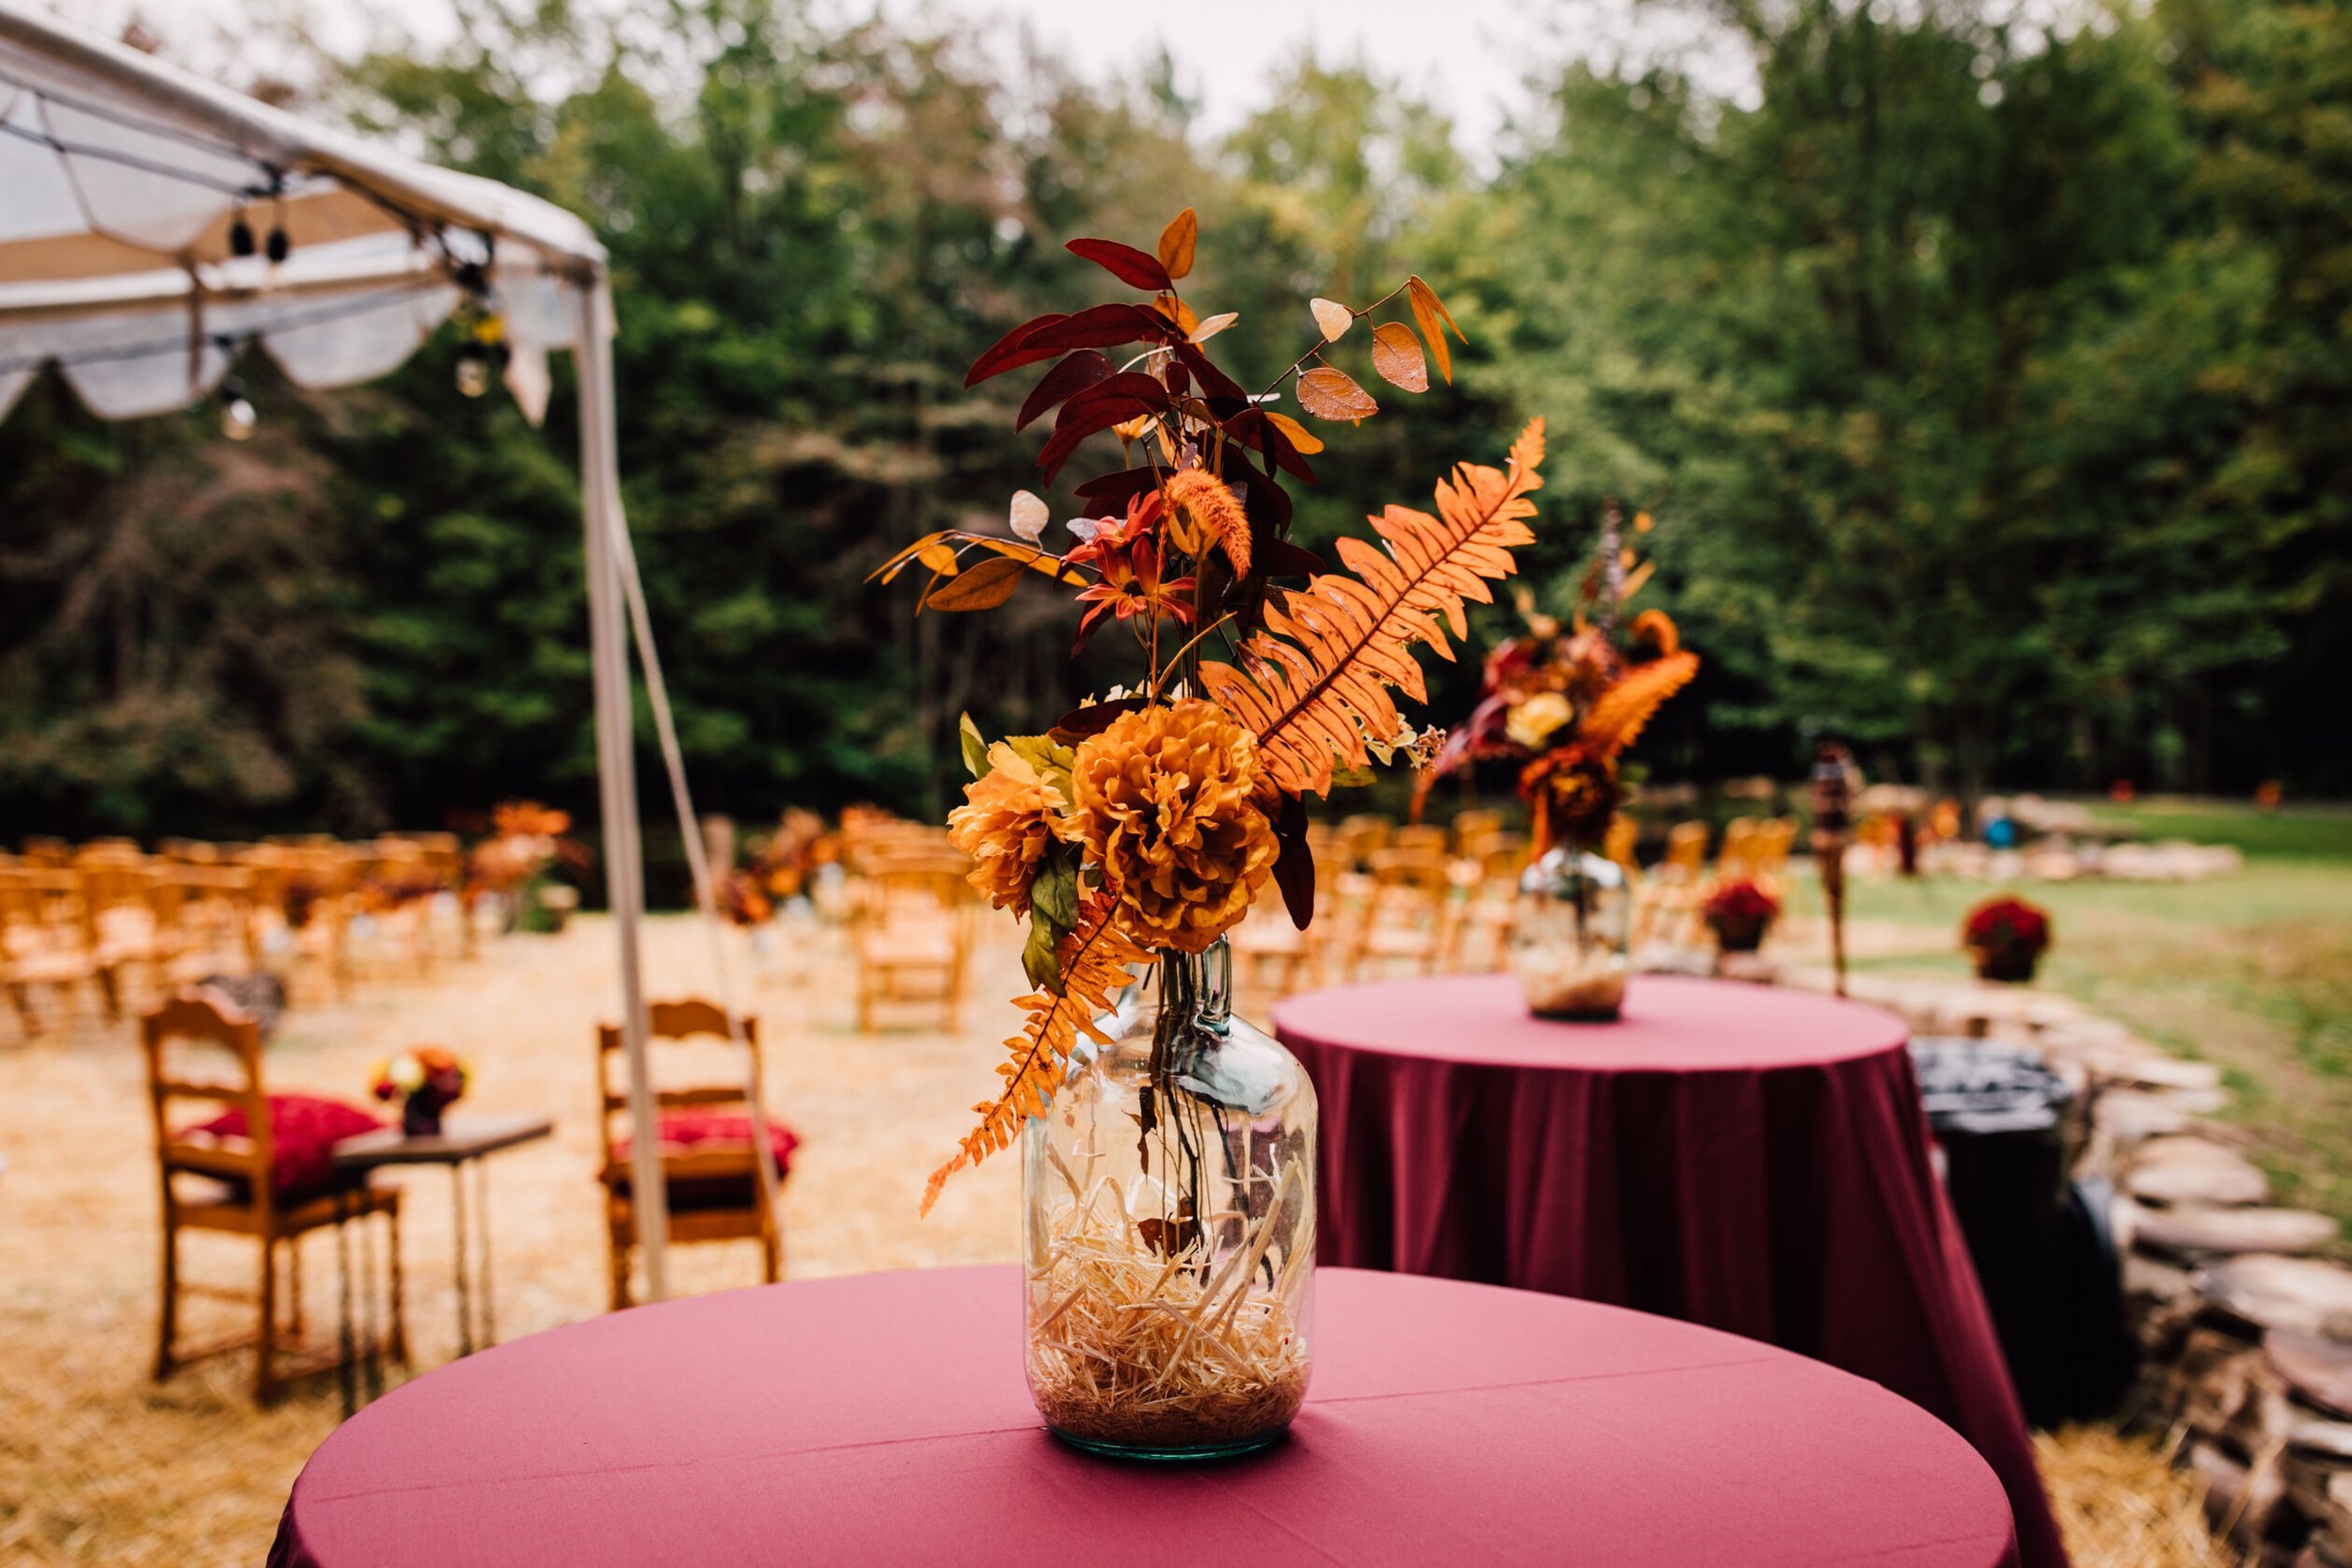  A dried floral arrangement sits on a table as part of the backyard wedding decor 